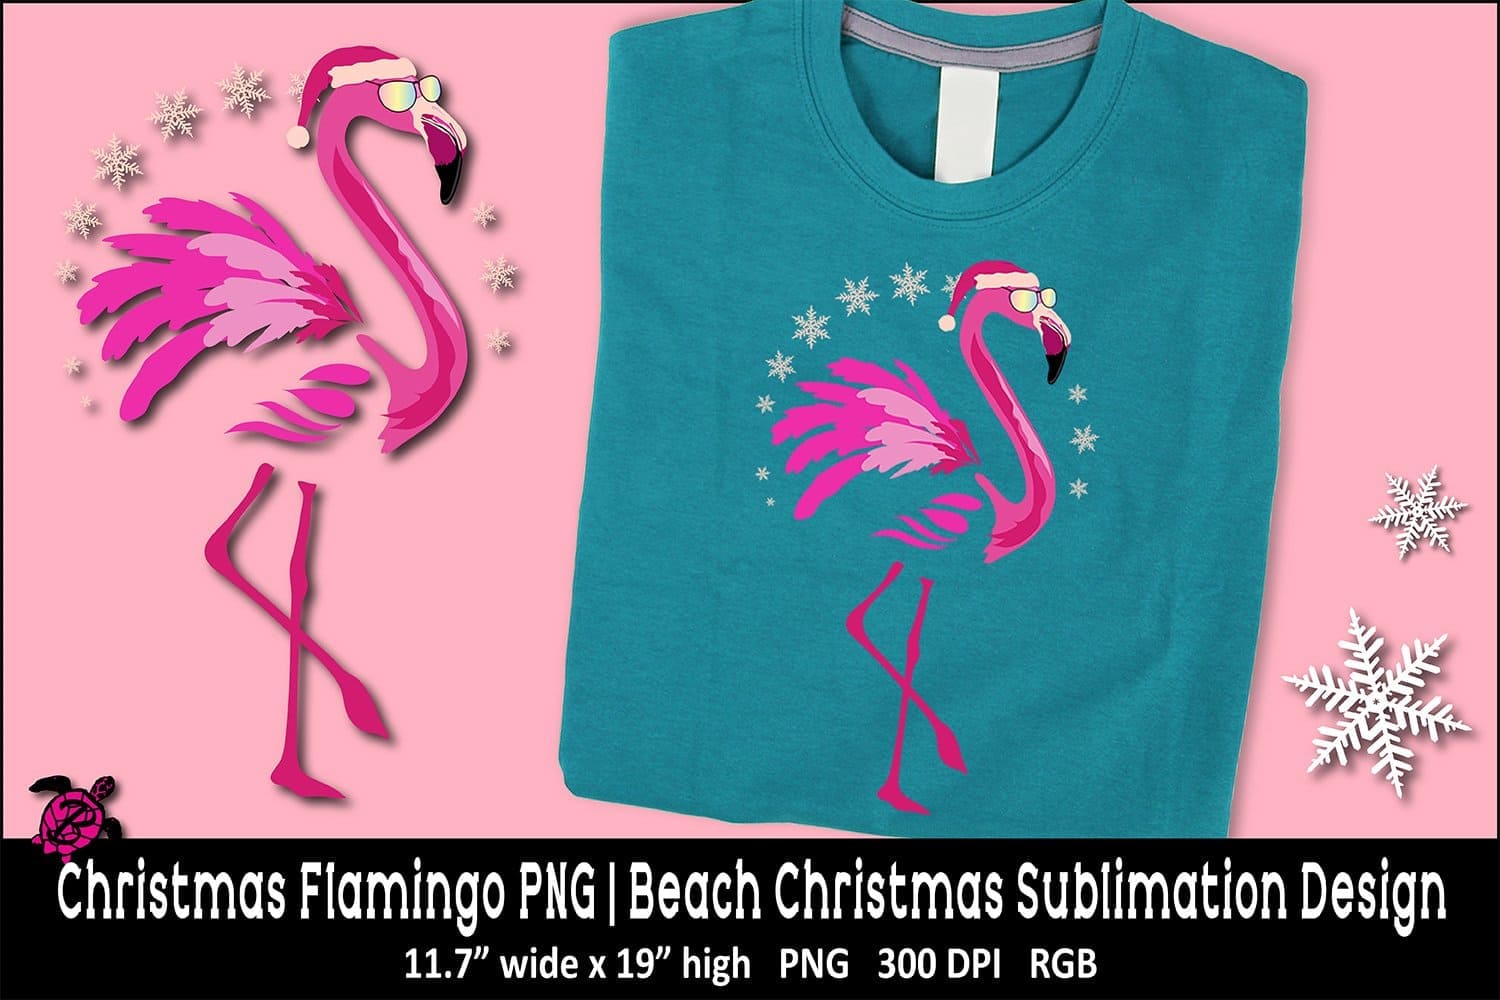 Christmas flamingo sublimation design teal thsirt cover image.